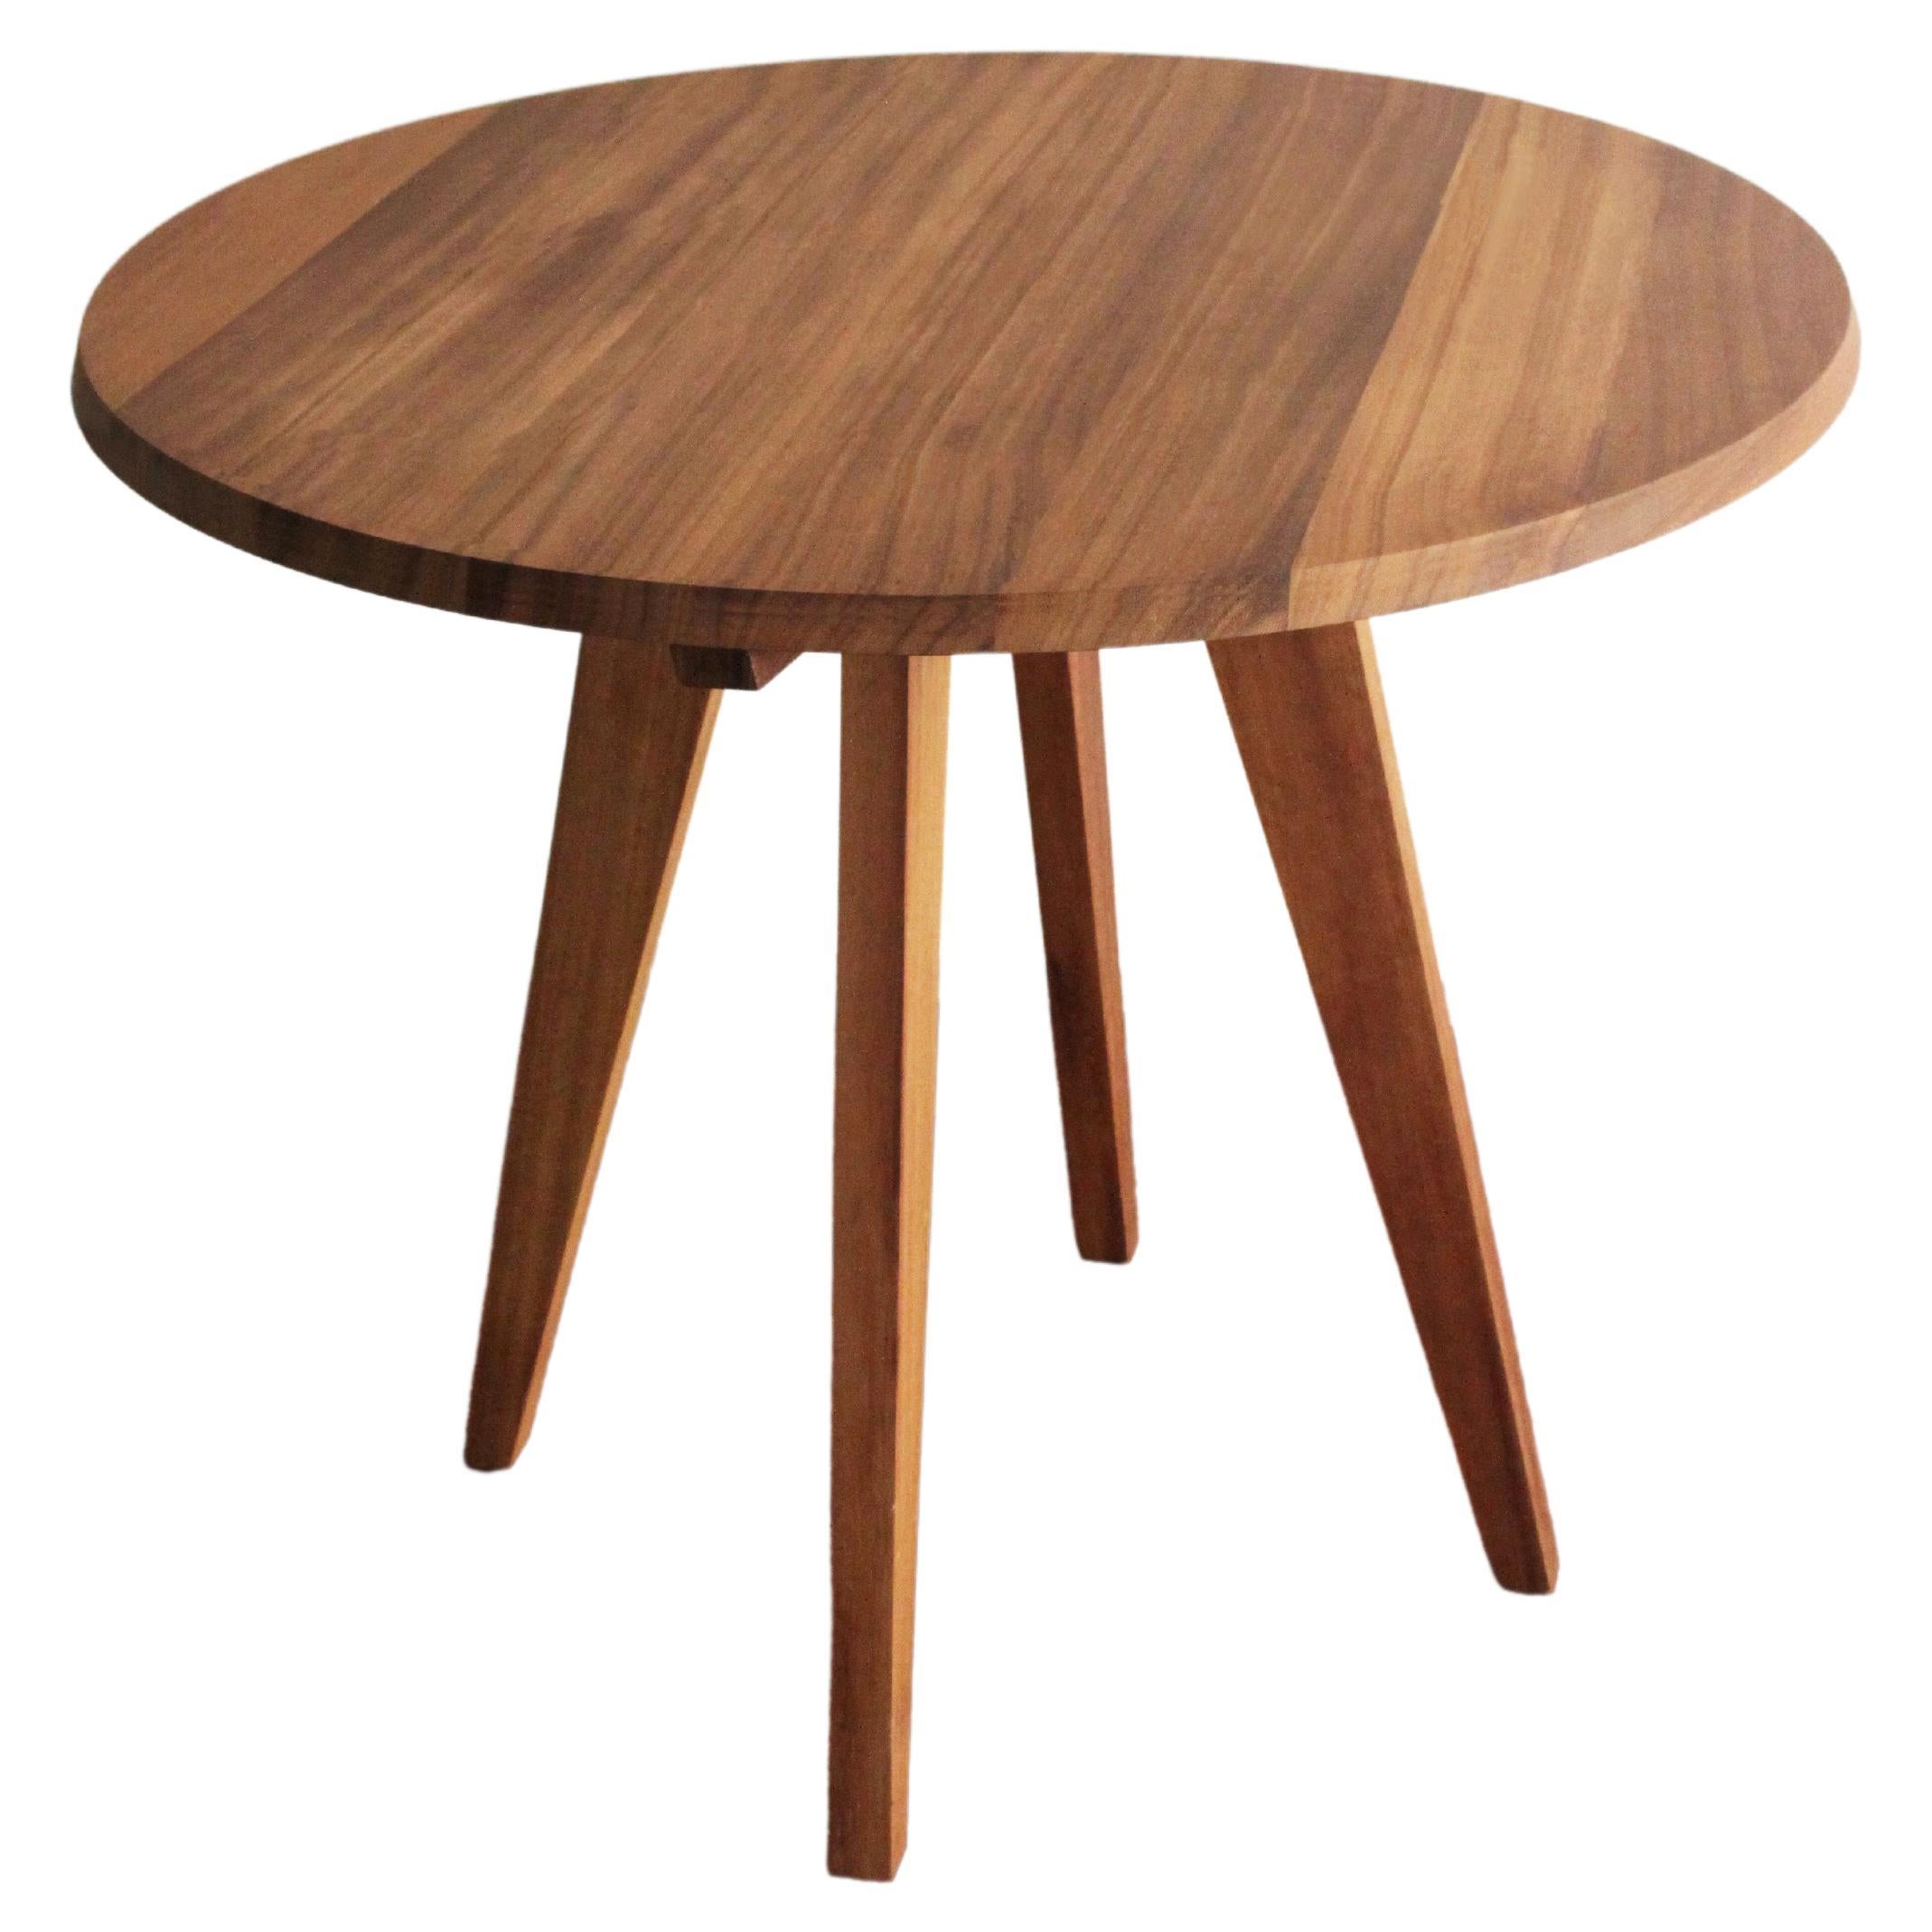 La Jacana Cuadro Table, Maria Beckmann, Represented by Tuleste Factory For Sale